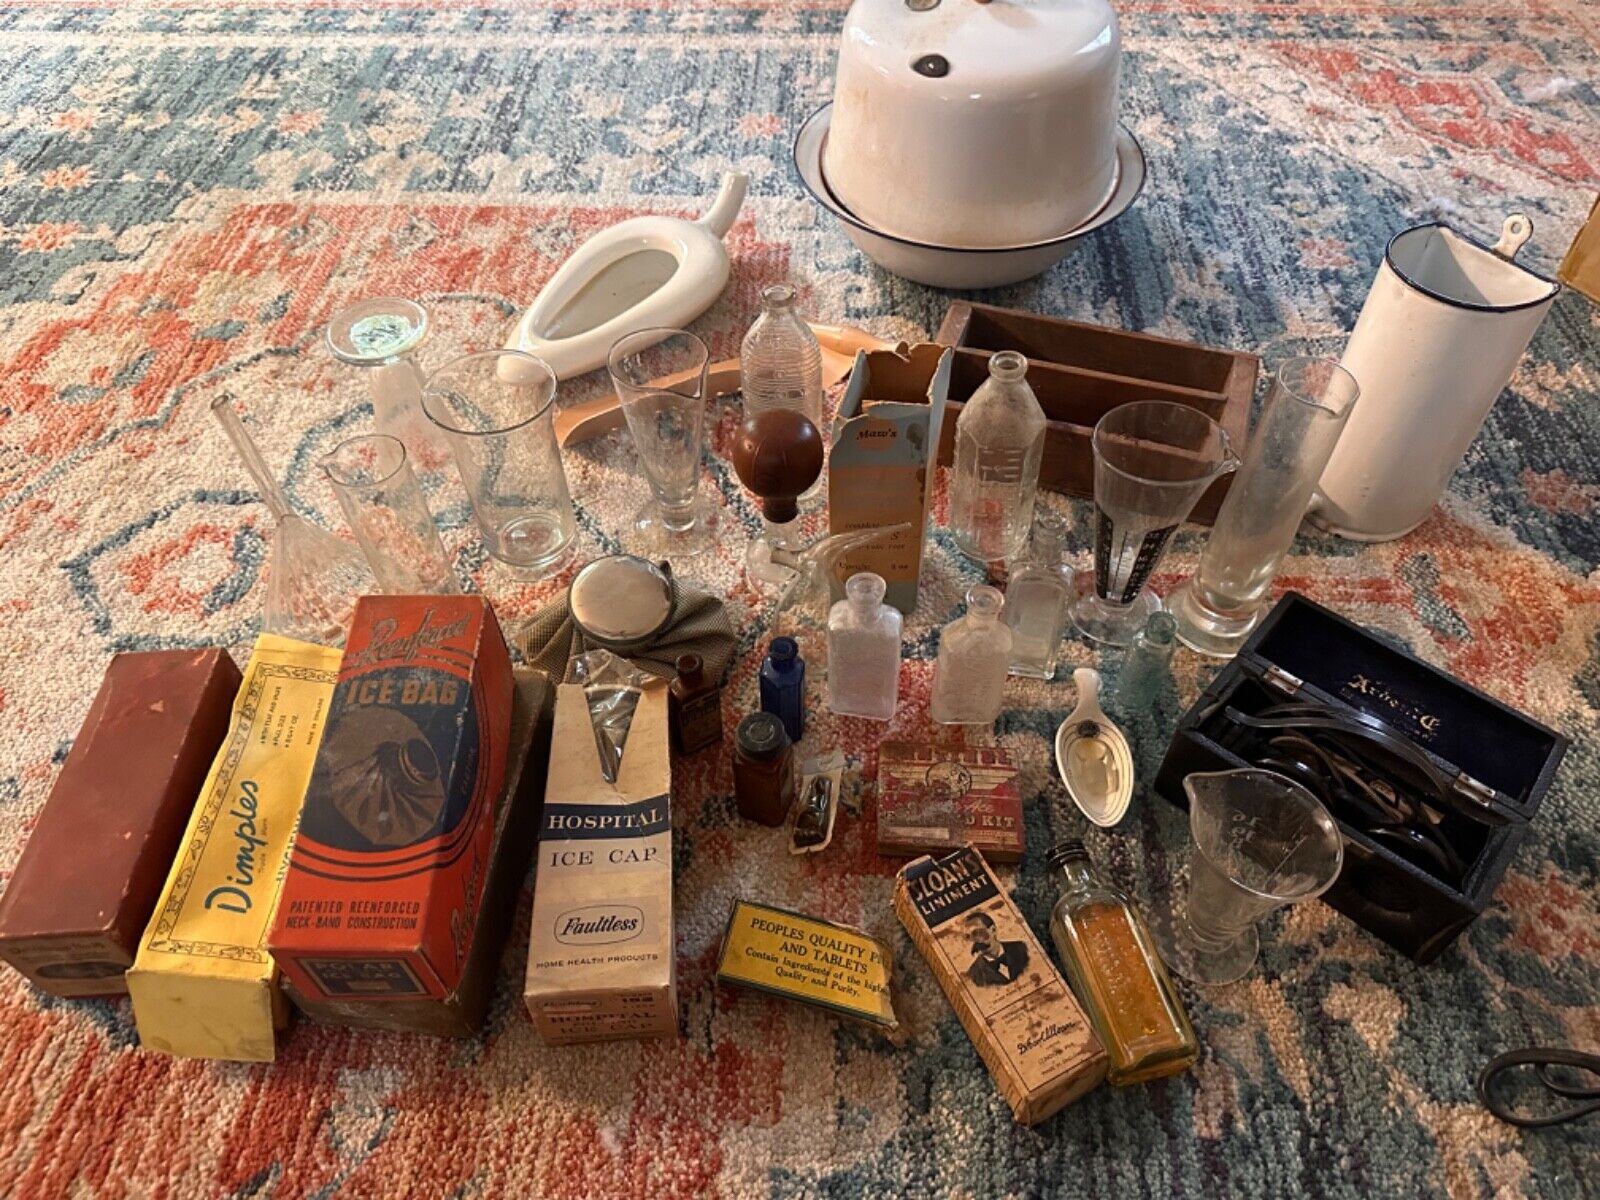 LARGE Lot of Antique Medical Bottles and Devices